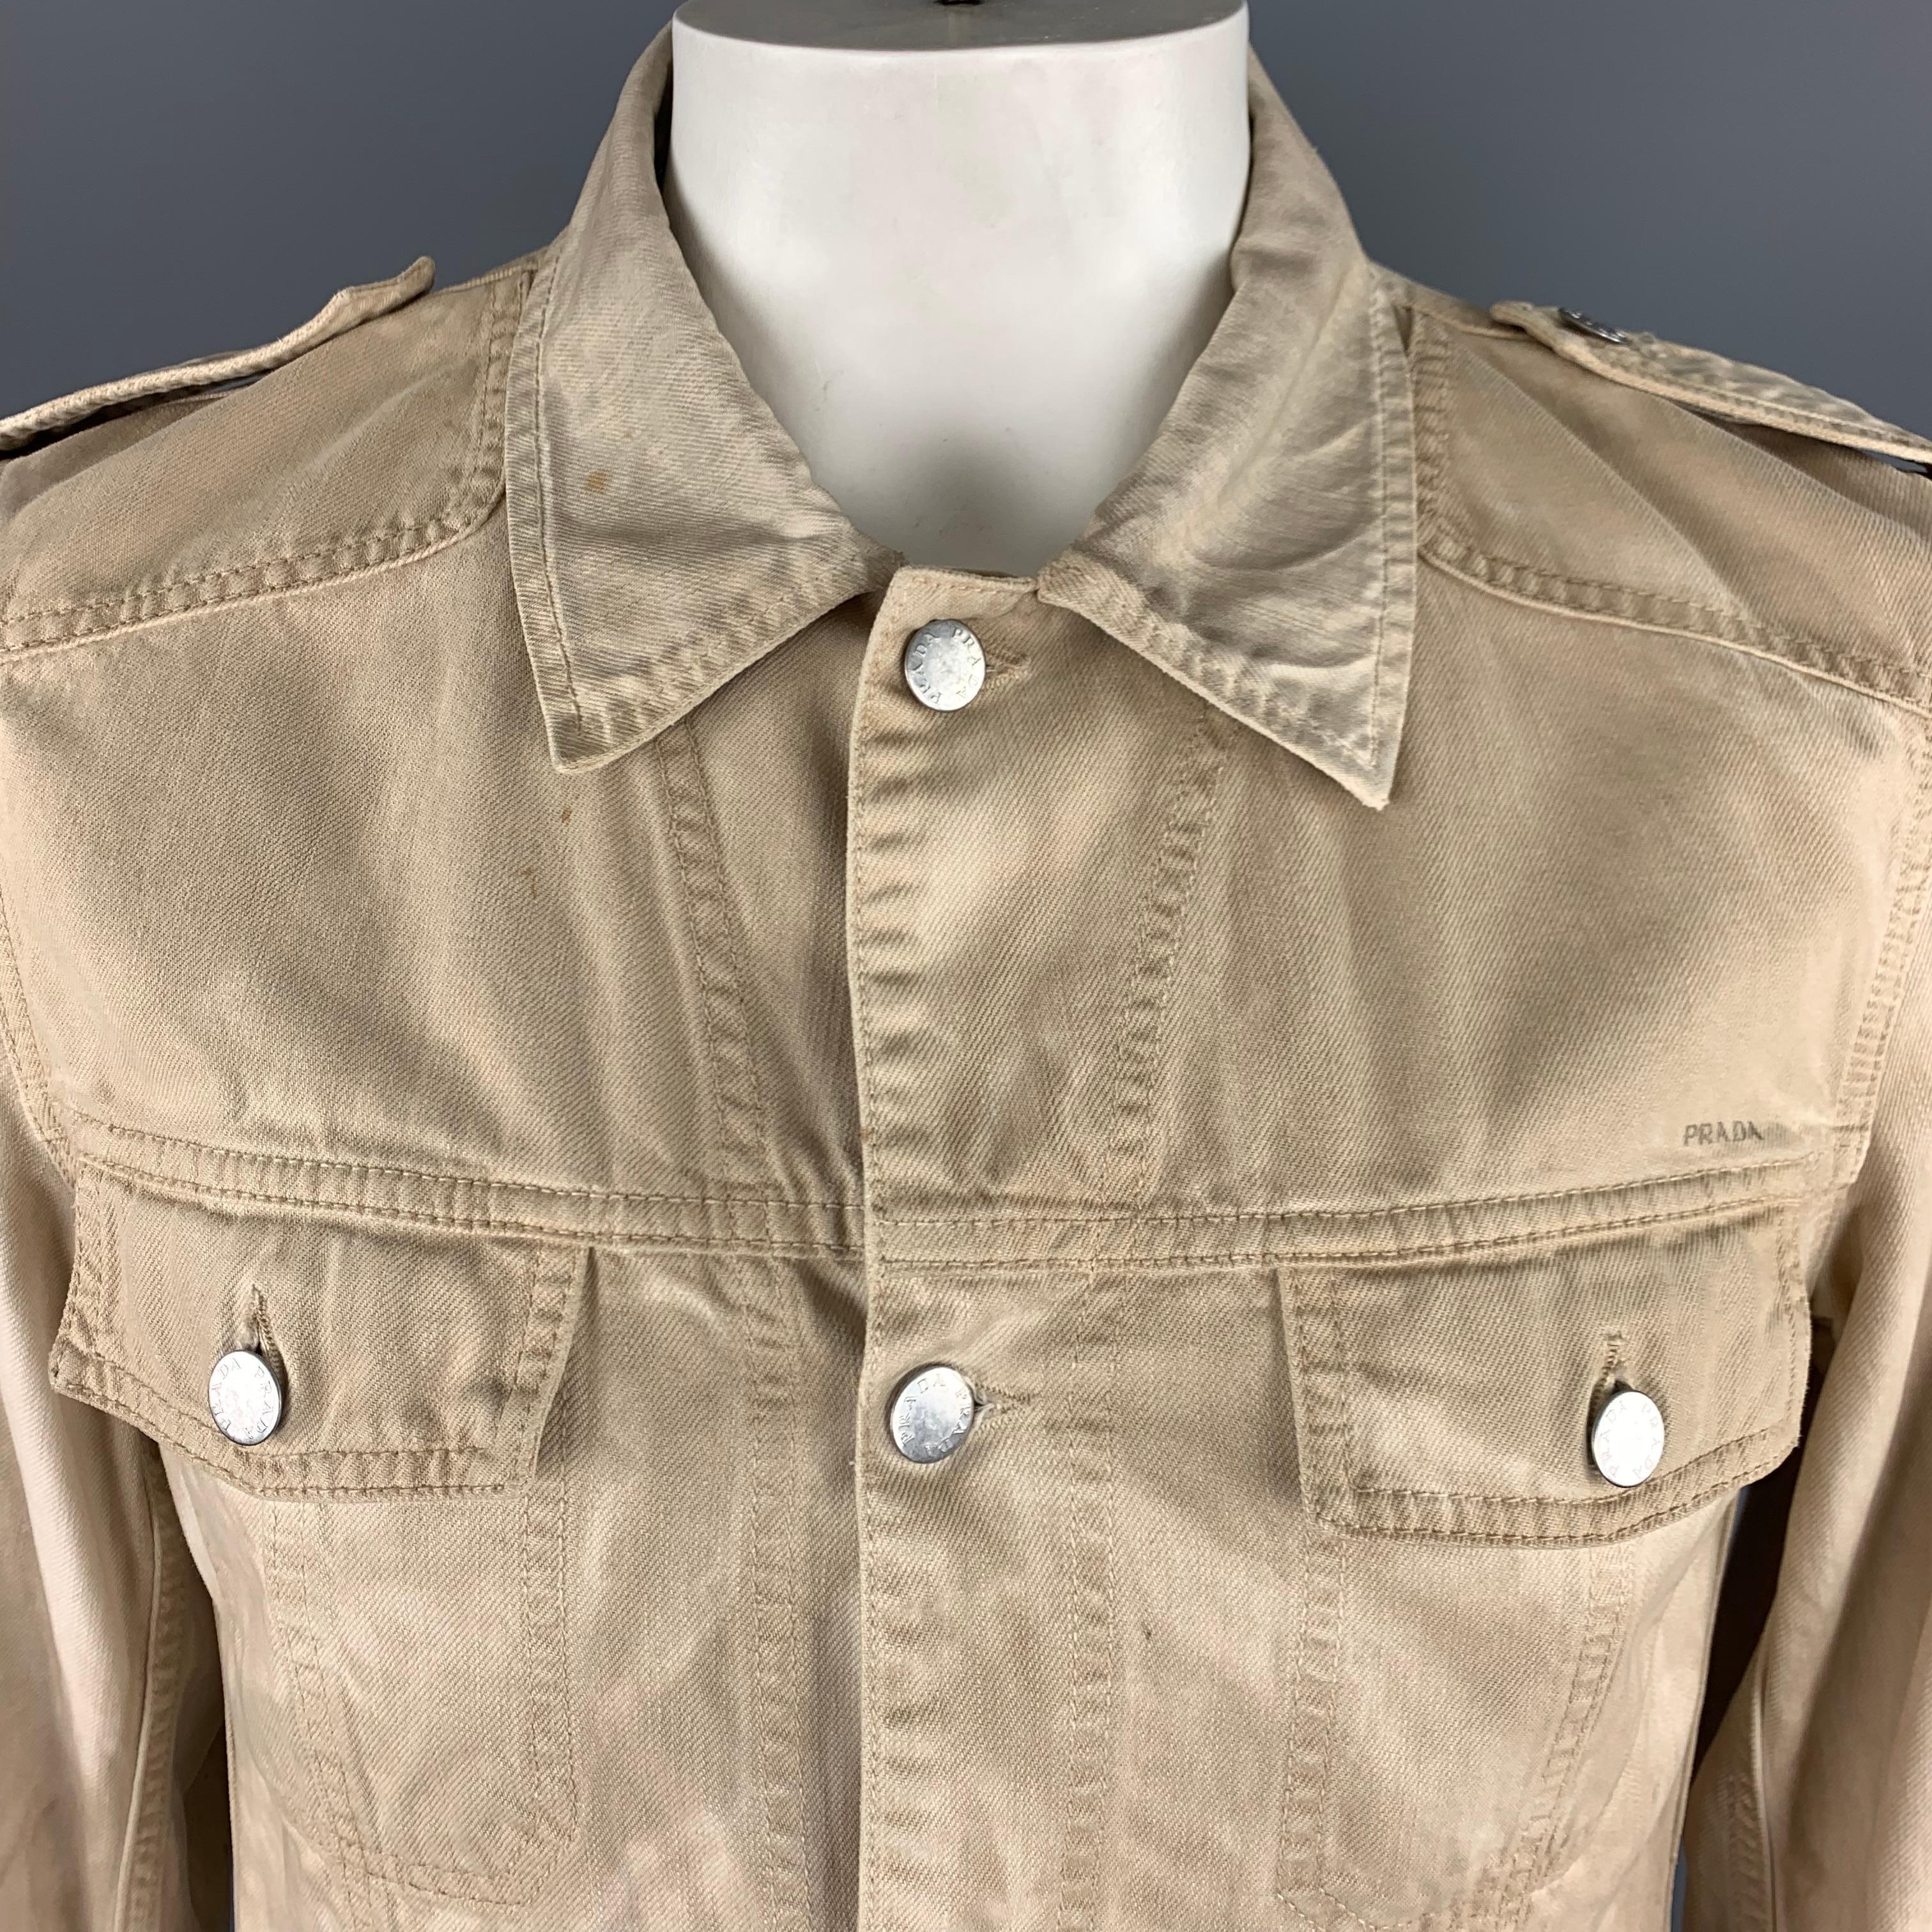 PRADA Dyed Trucker Jacket comes in khaki tones in a cotton material, with epaulettes, patch pockets, buttoned cuffs and front closure. Intentional distressed effect throughout. Made in Italy.
 
Excellent  Pre-Owned Condition.
Marked: IT 52
